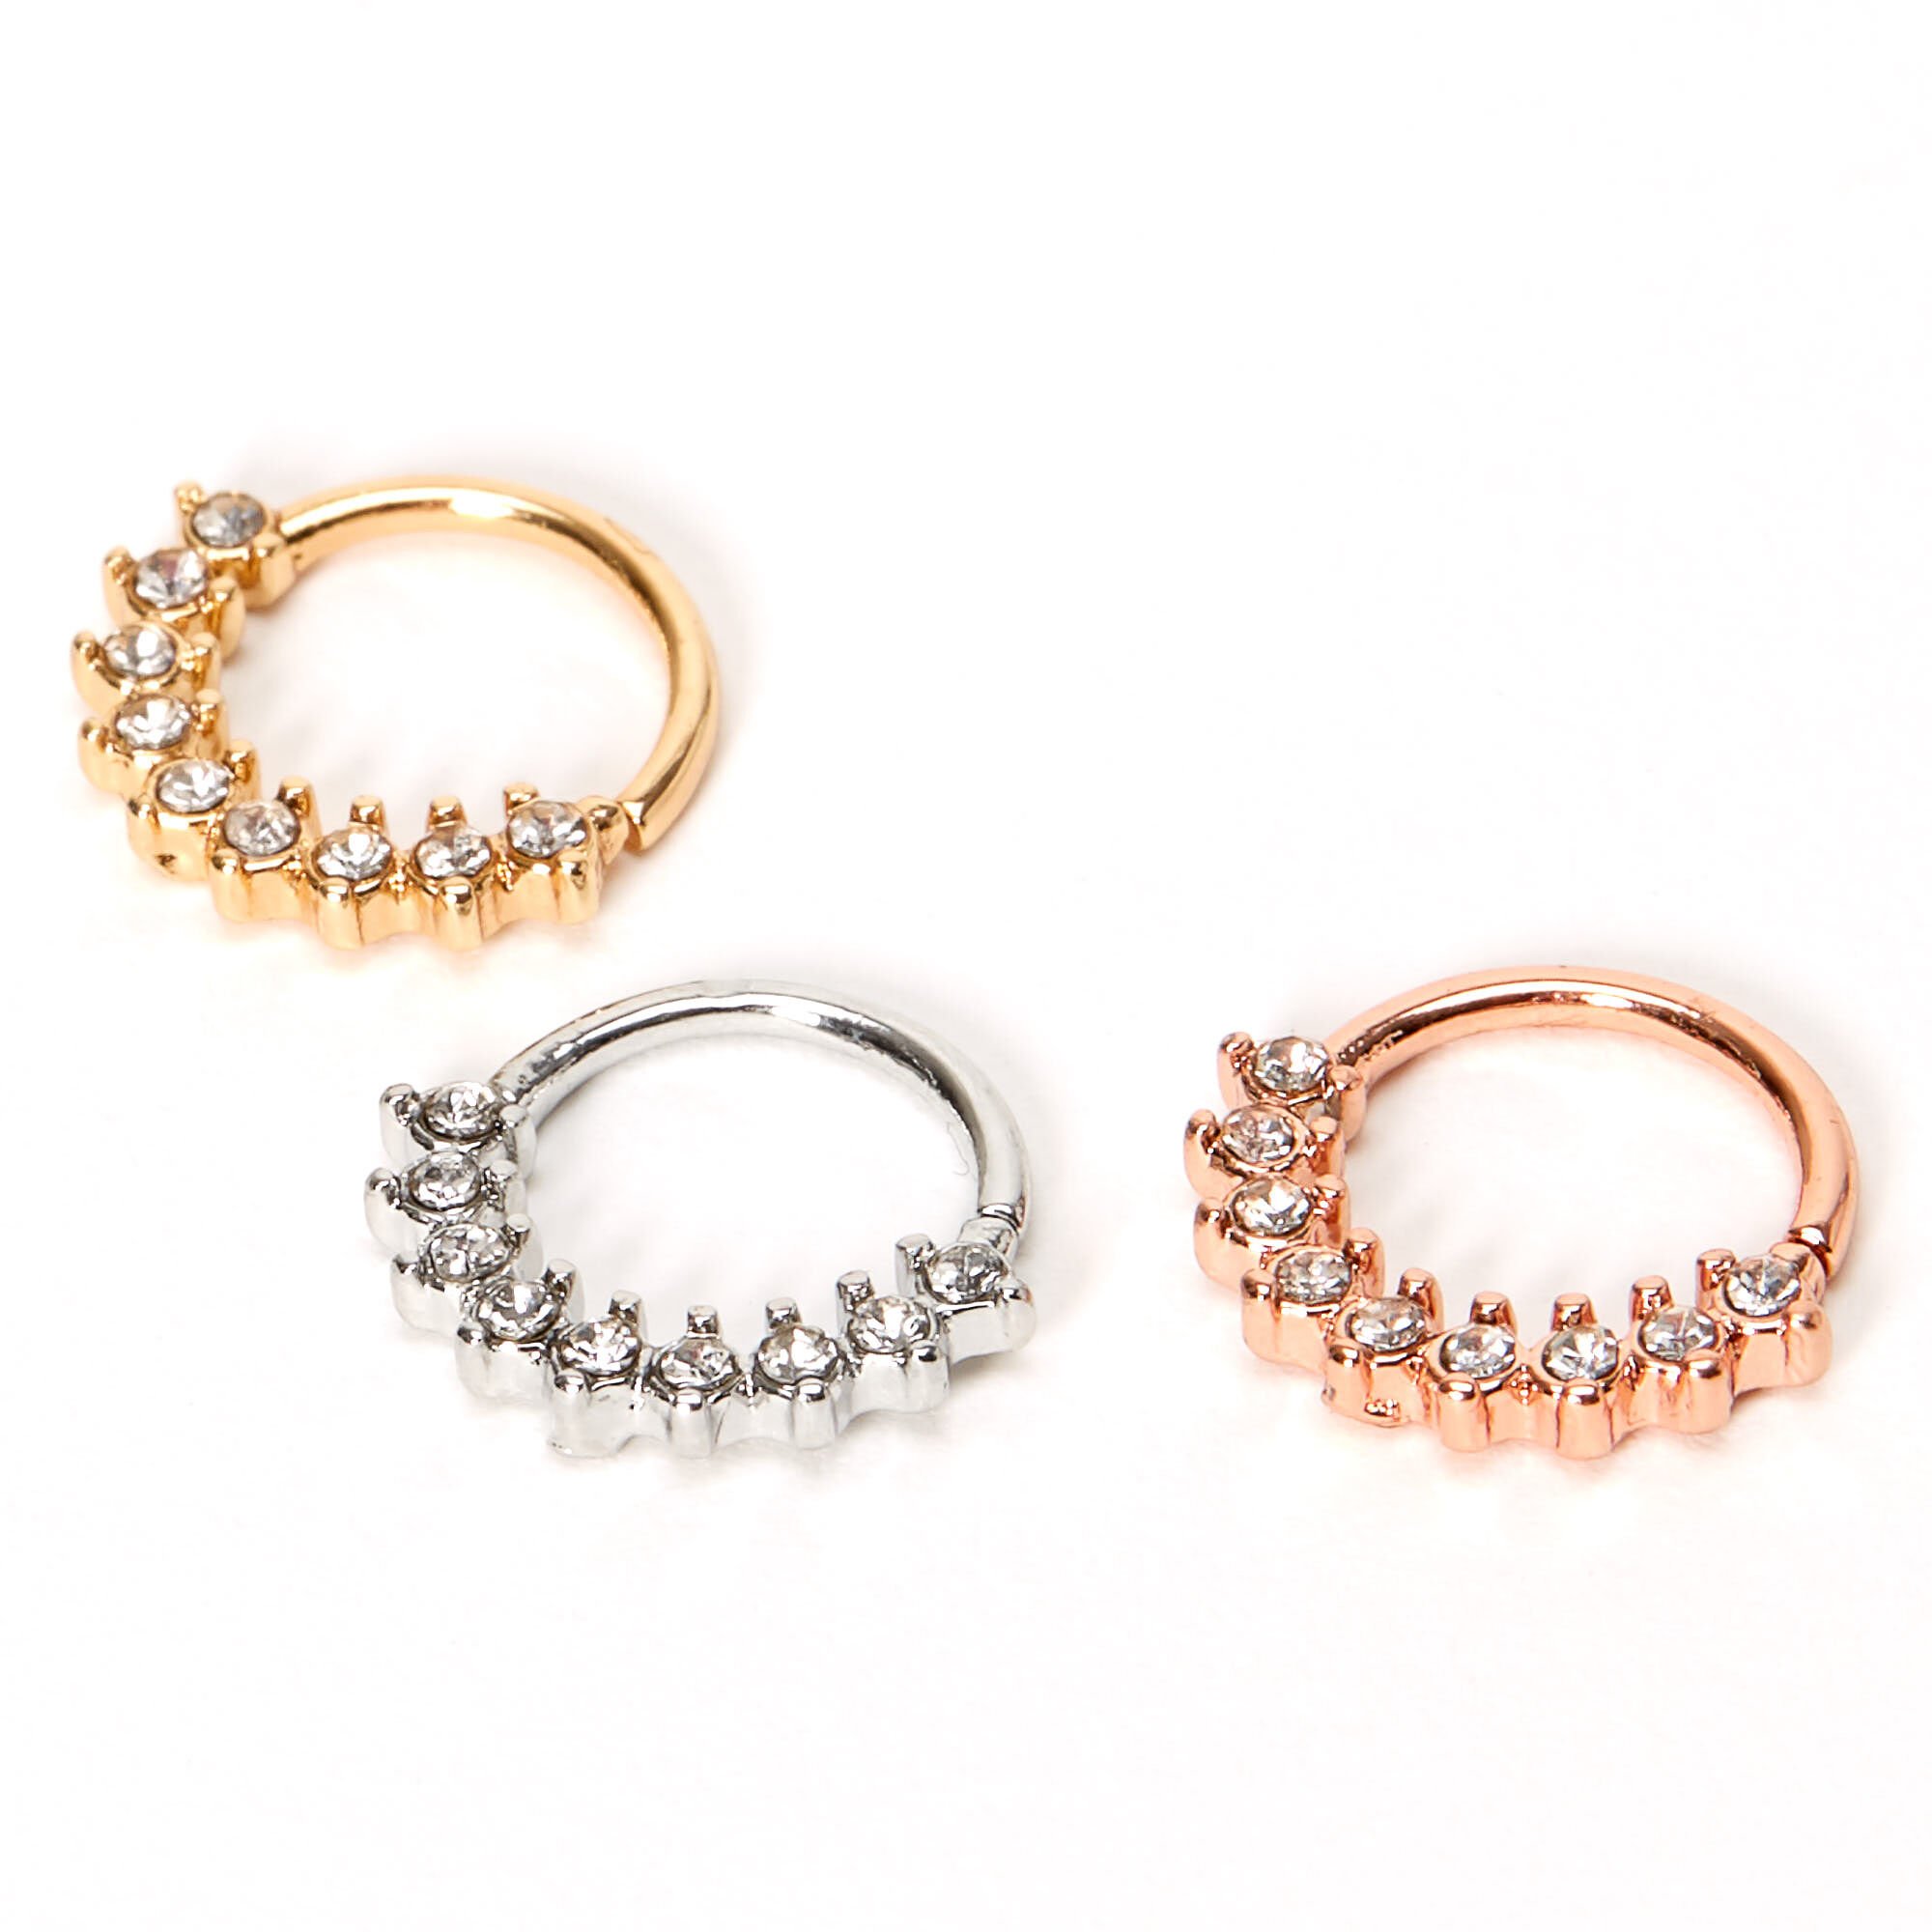 View Claires Mixed Metal 18G Crystal Luxe Cartilage Hoop Earrings 3 Pack Rose Gold information